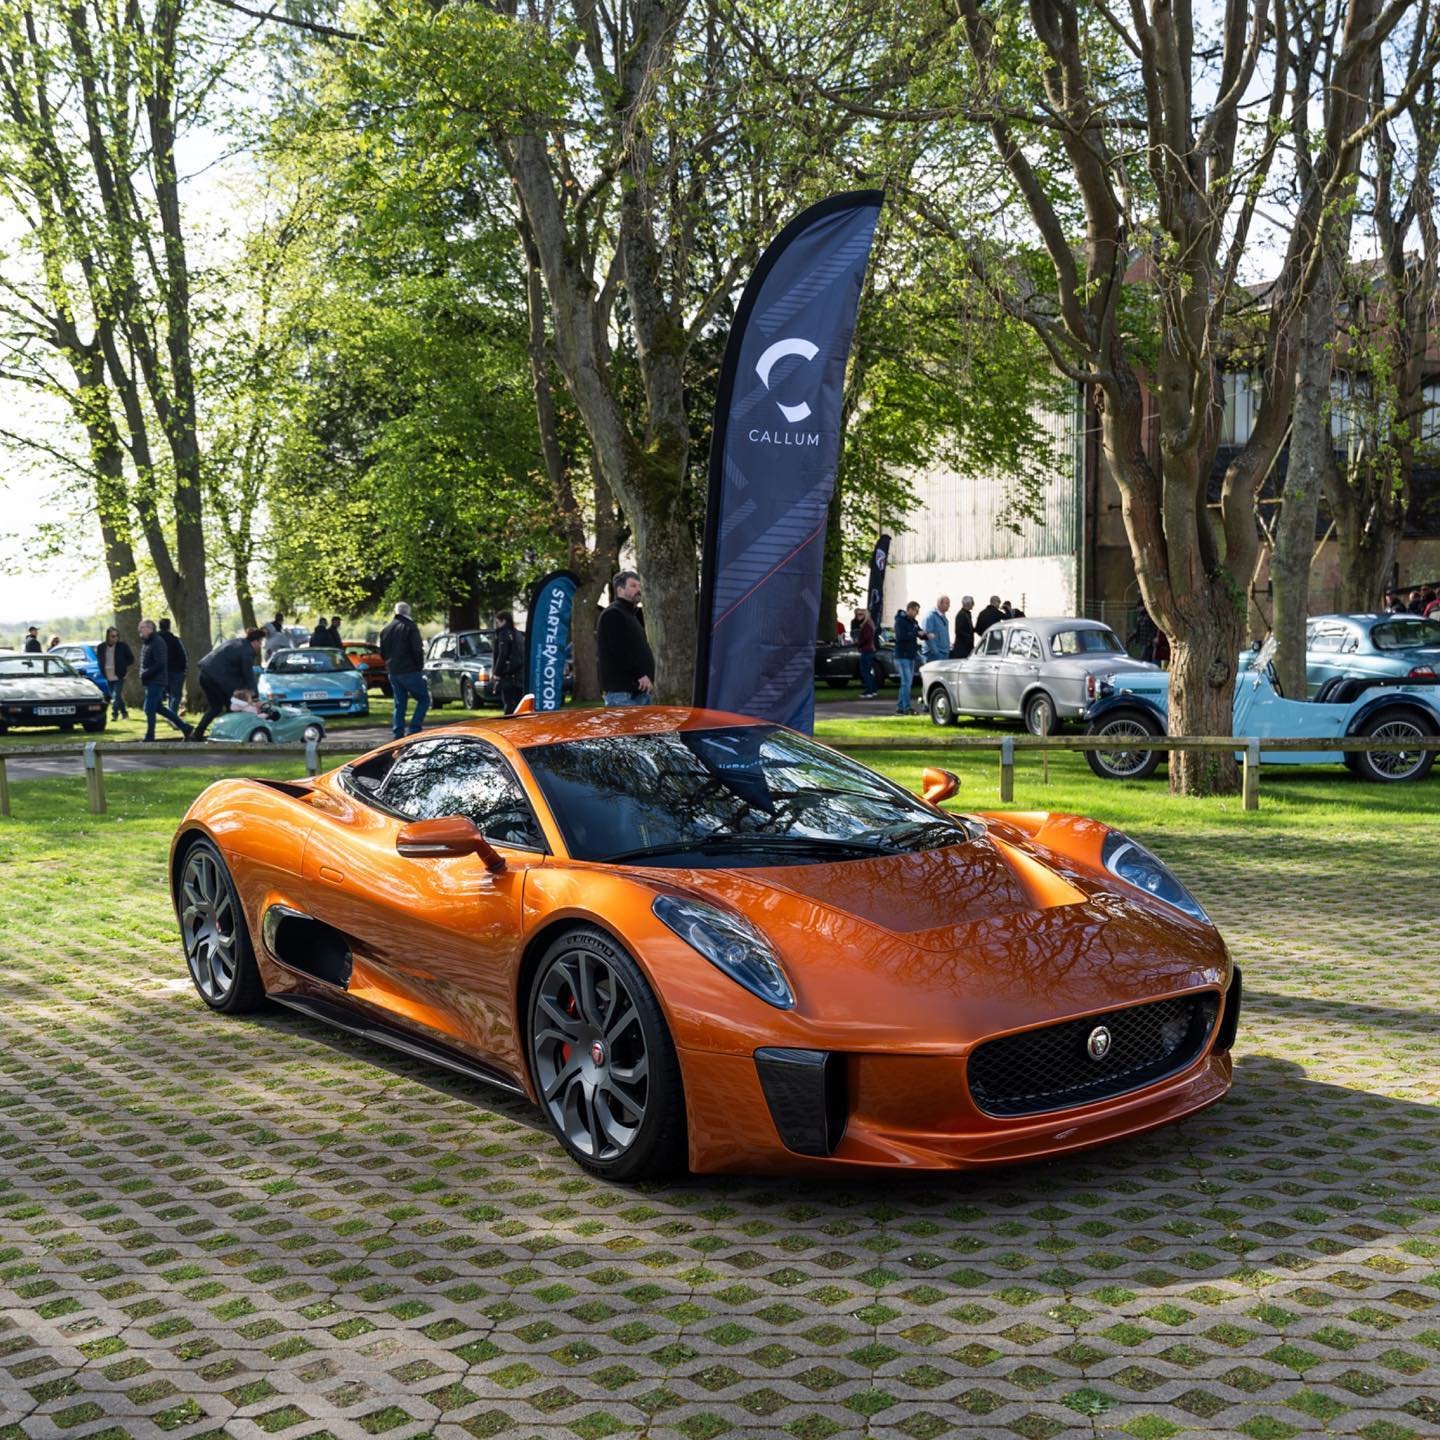 It&rsquo;s a good thing the world&rsquo;s first road-legal C-X75 isn&rsquo;t camera shy! 

Thank you to everyone who came to admire this stunning car, the reception was amazing! Enjoy these images captured from Sunday&rsquo;s unforgettable Scramble! 